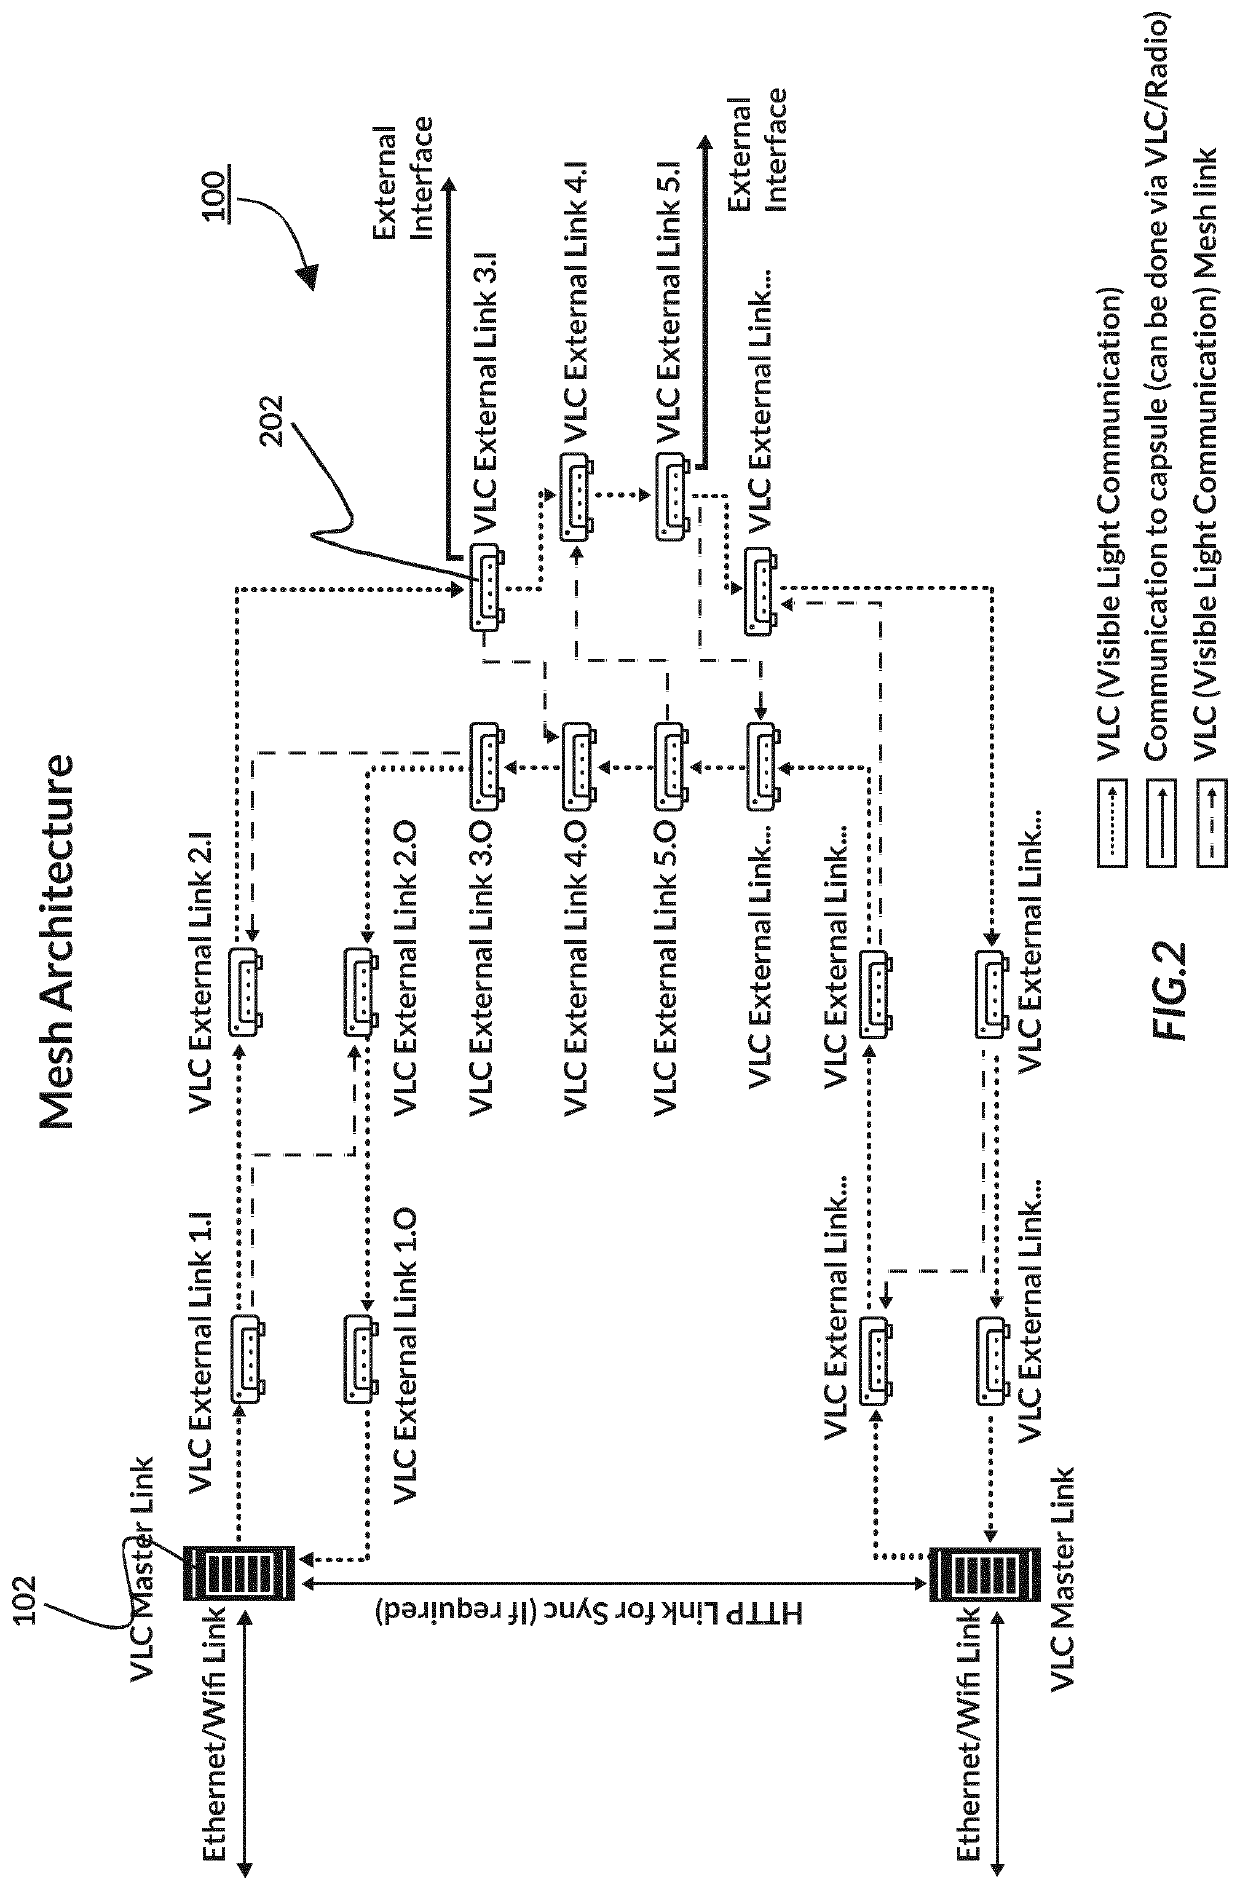 Optical wireless communication system and adaptive optical wireless communication network